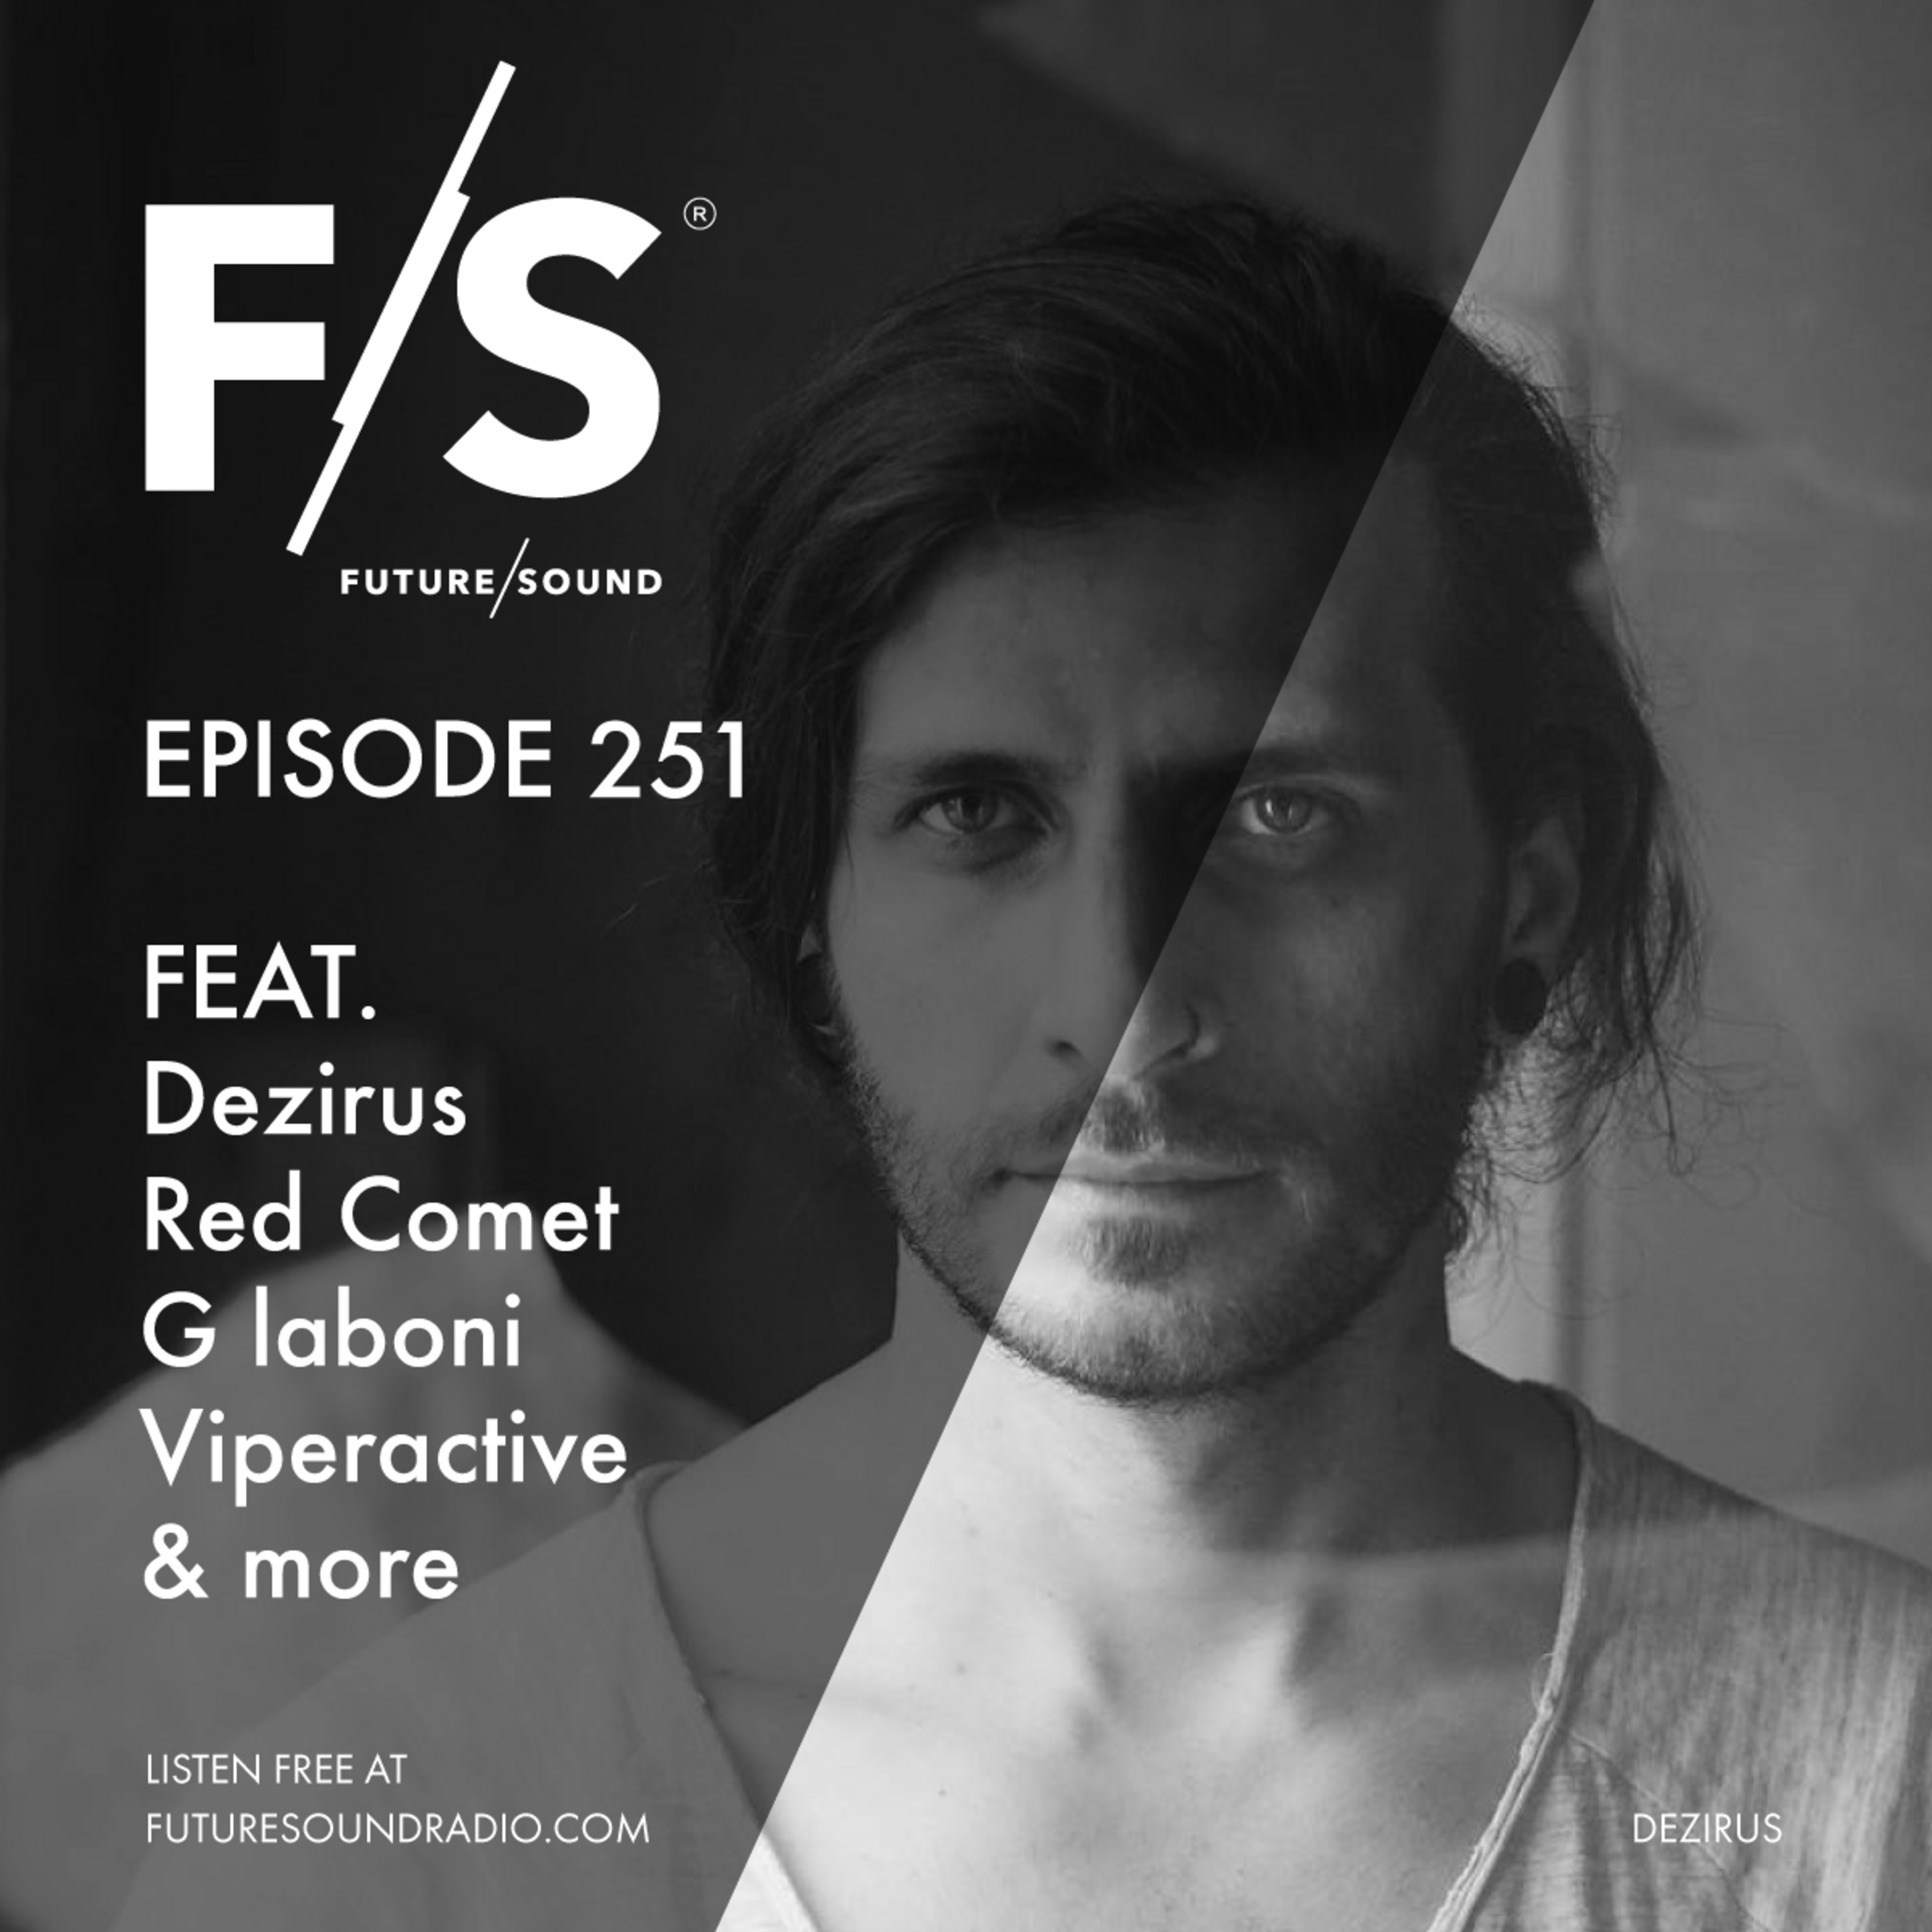 Episode 251: [Aired: JAN.07] - Side A feat. Dezirus, Red Comet, G Iaboni, Viperactive, and more